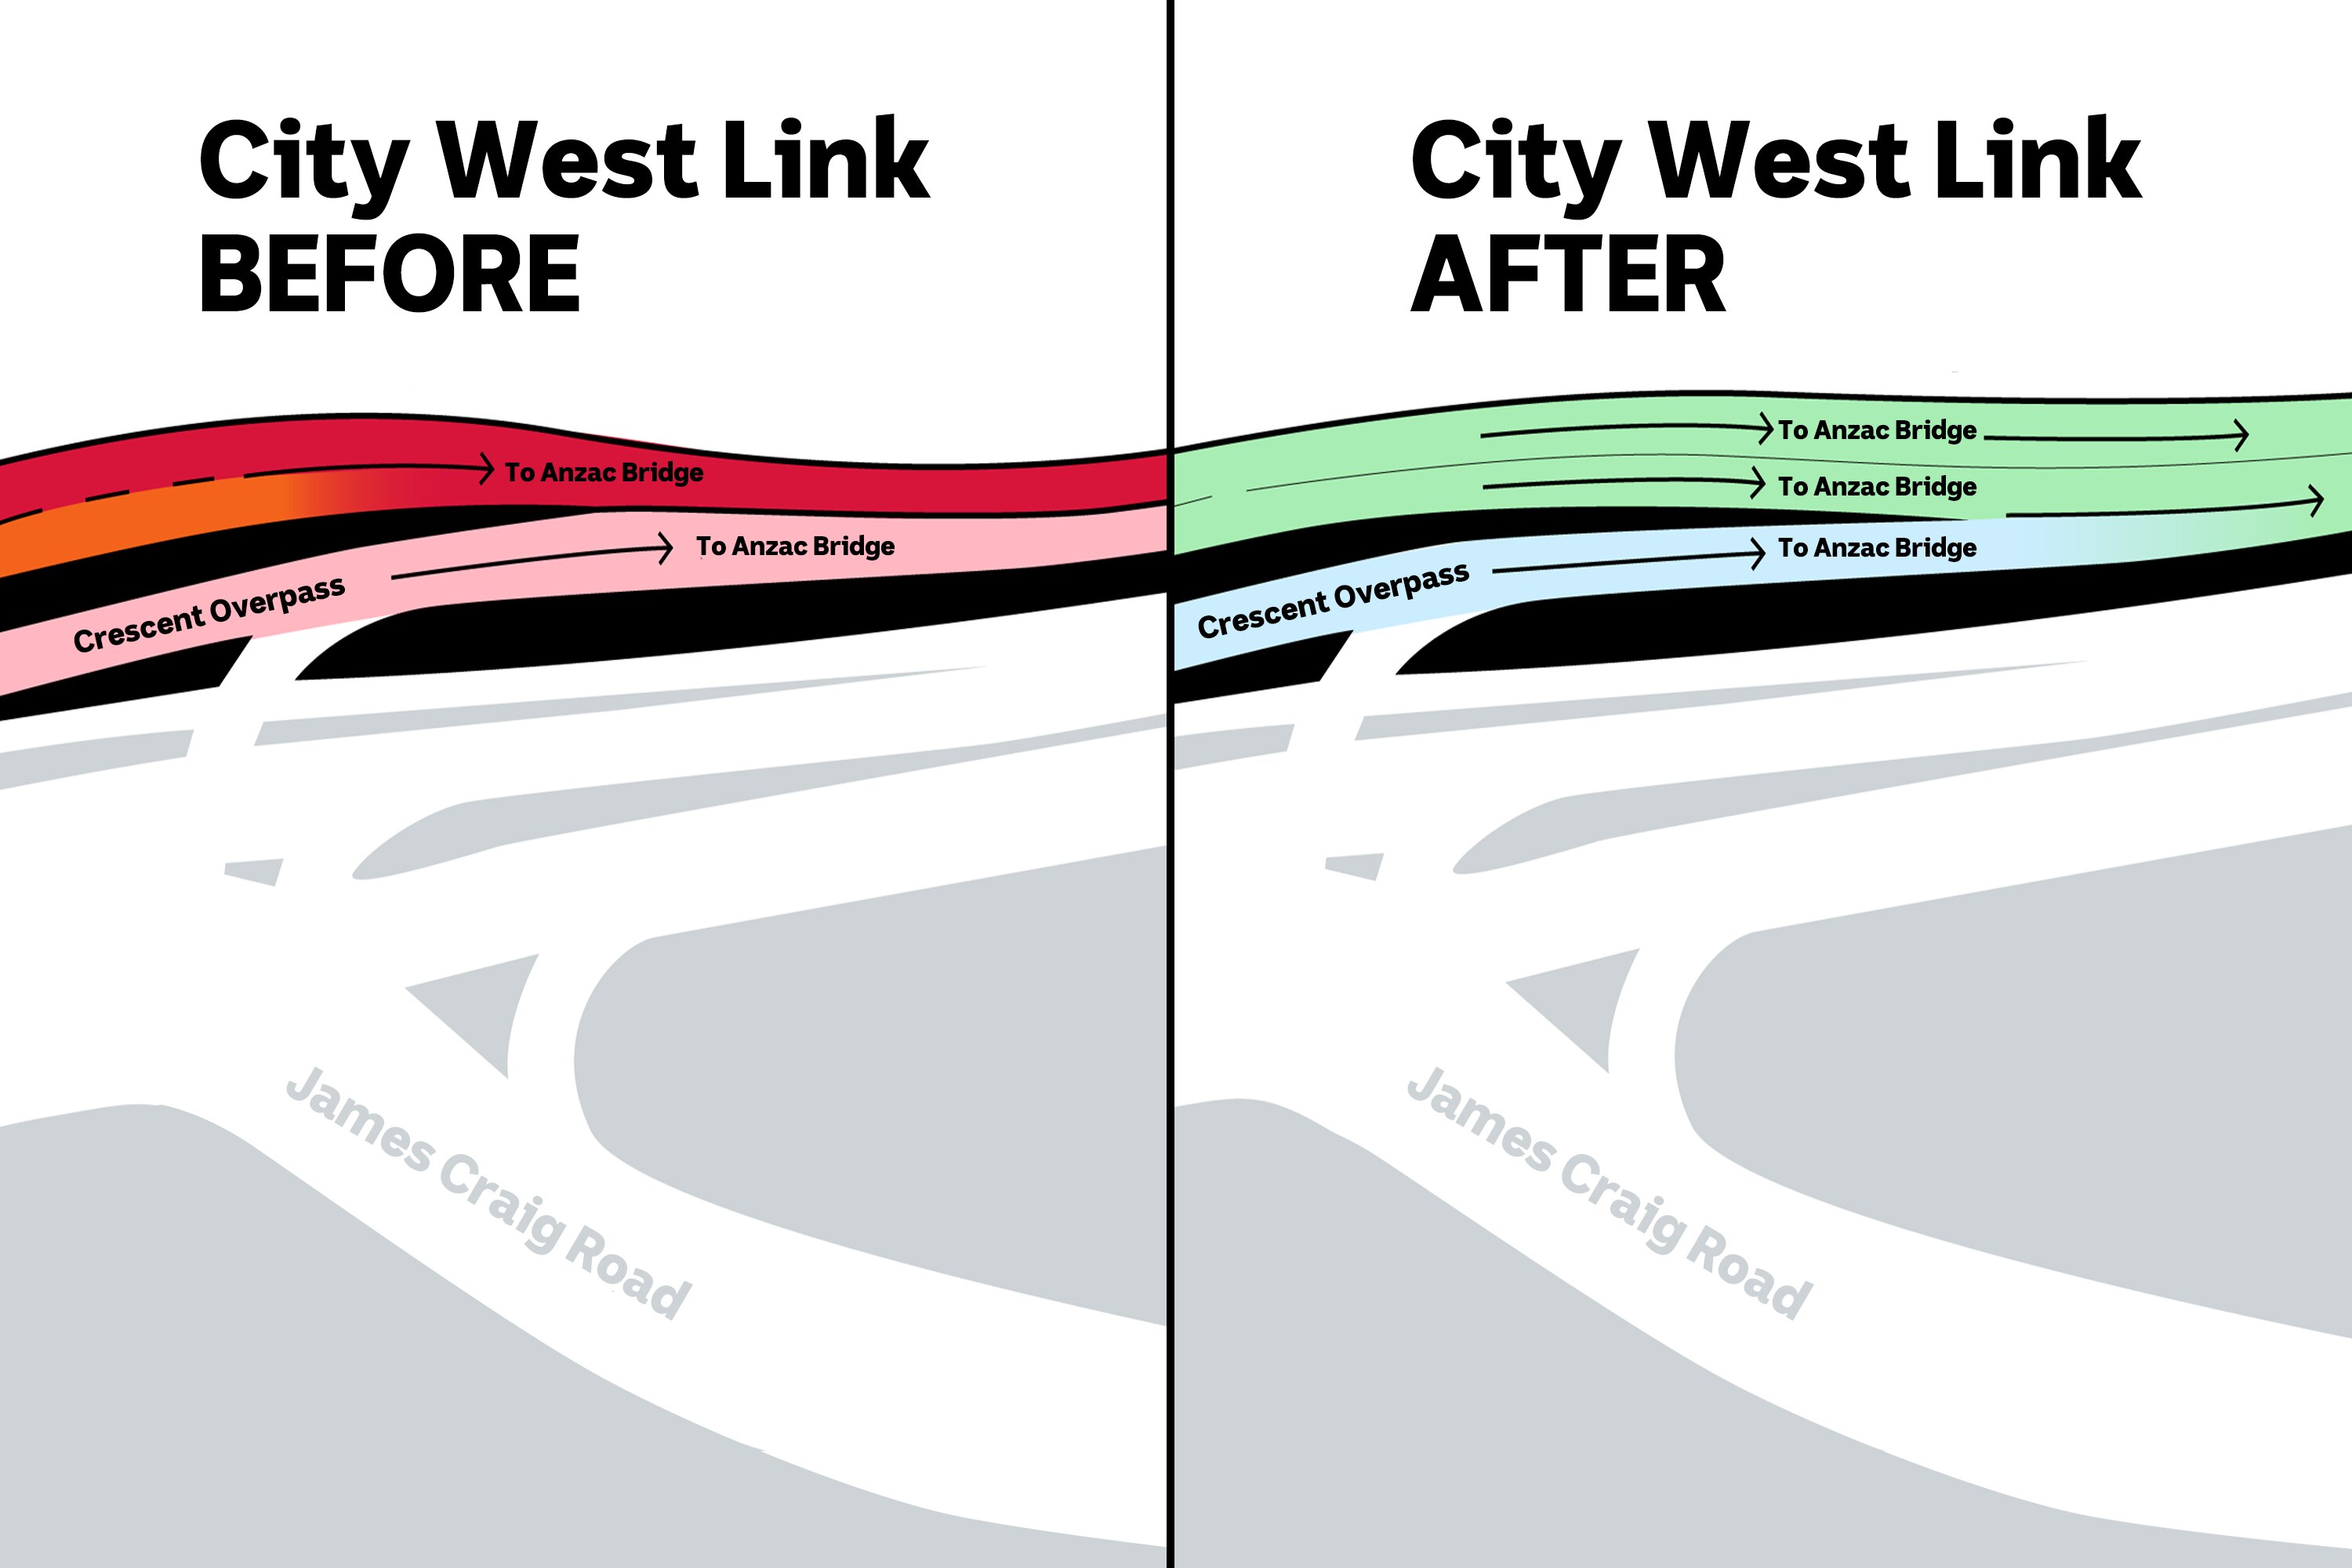 a graph of the City West Link changes before and after